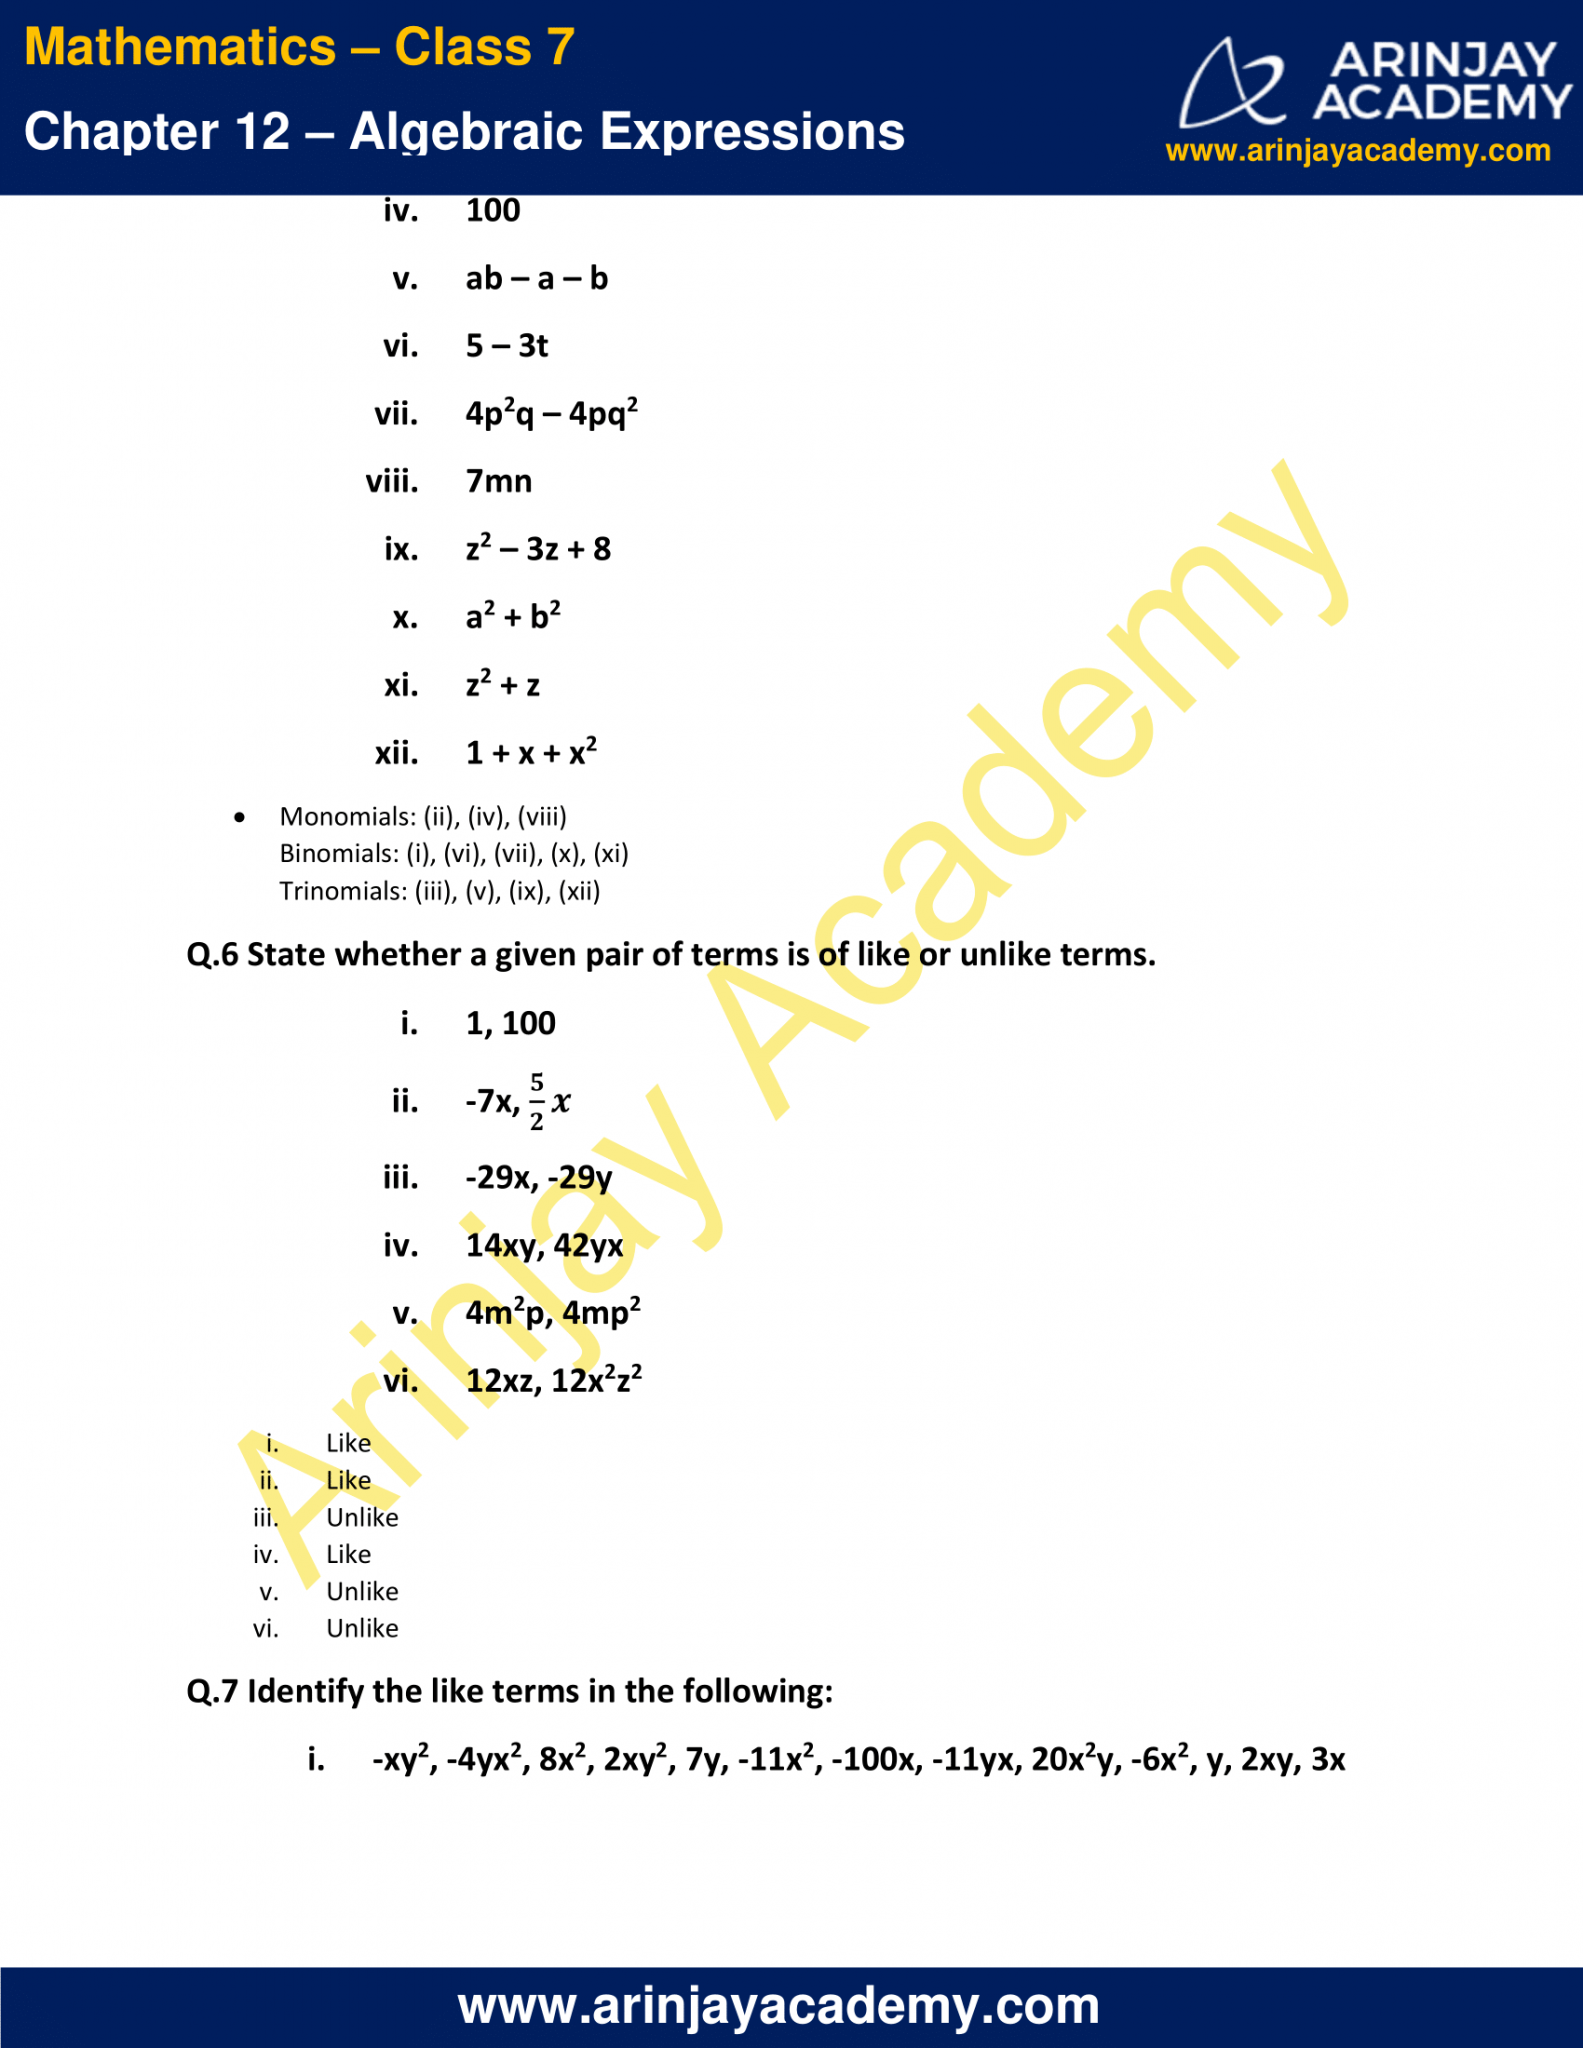 ncert-solutions-for-class-7-maths-chapter-12-algebraic-expressions